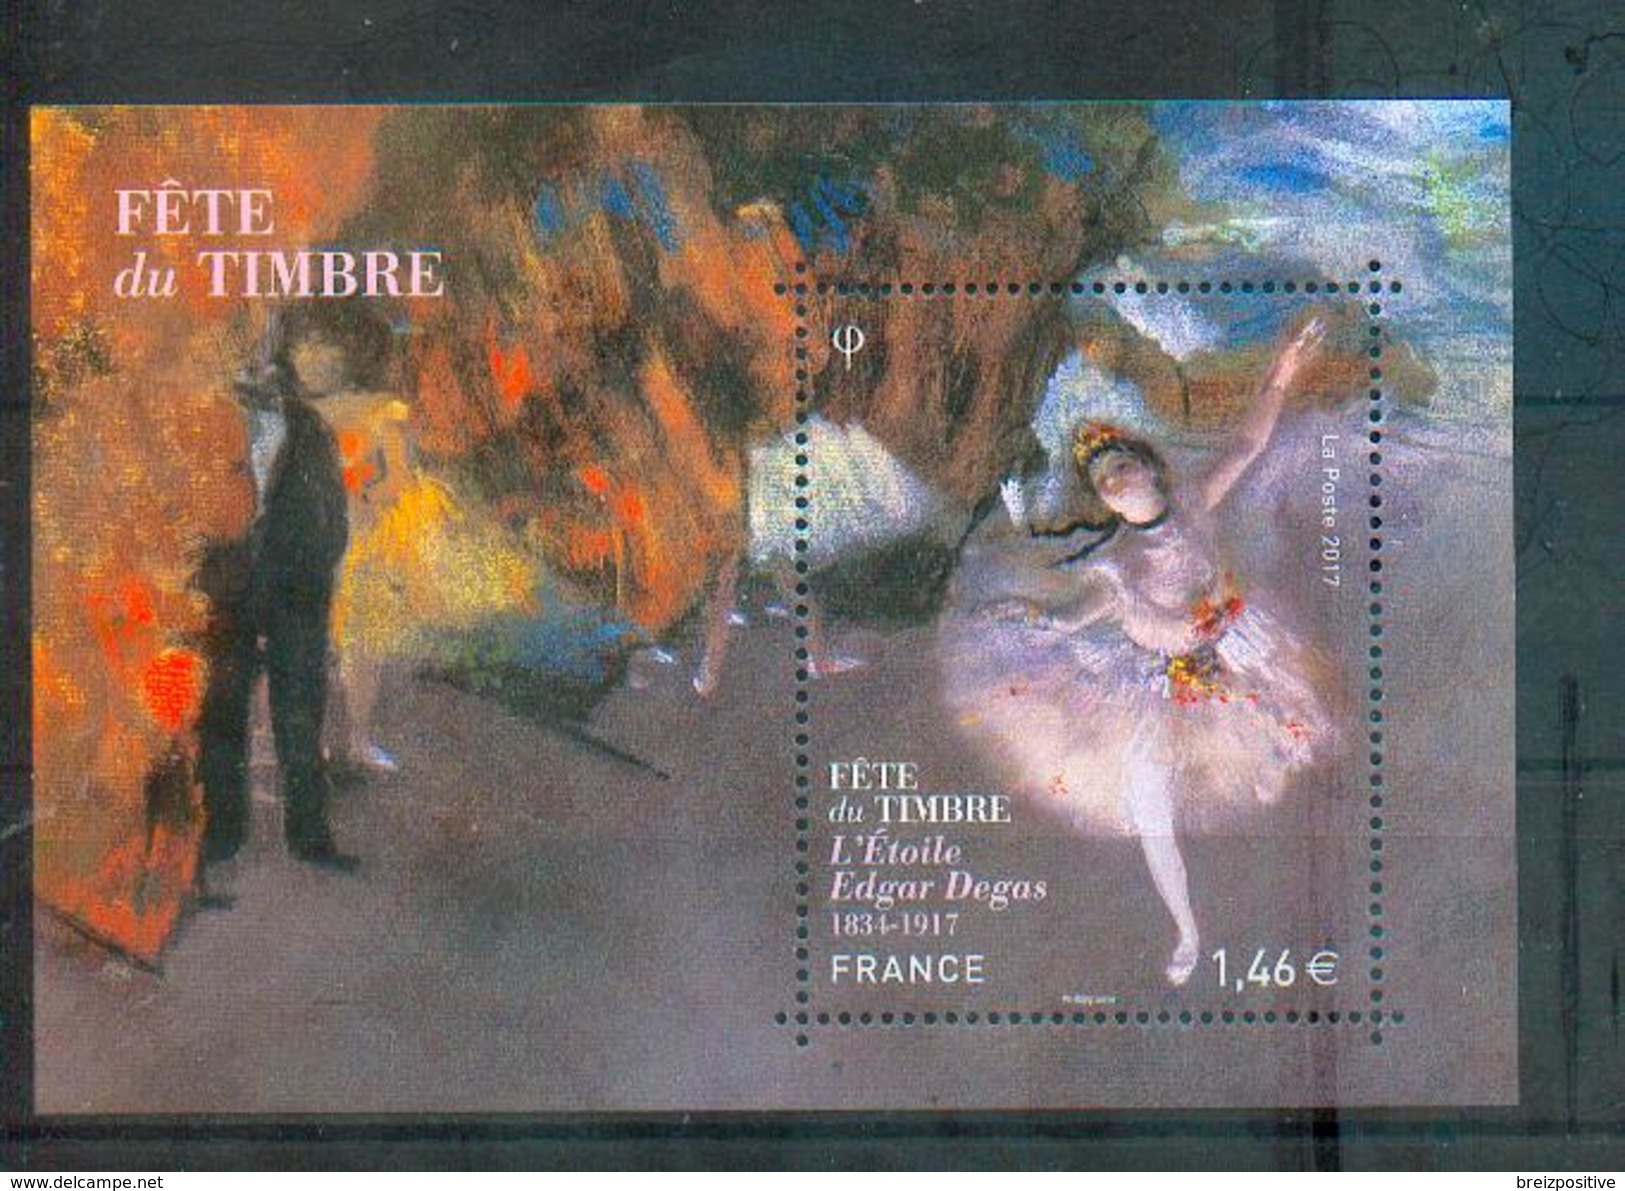 France 2017 - Edgar Degas, "L'Etoile", Musée D'Orsay / "The Star Of The Ballet", Orsay Museum, Paris - MNH - Impressionismus